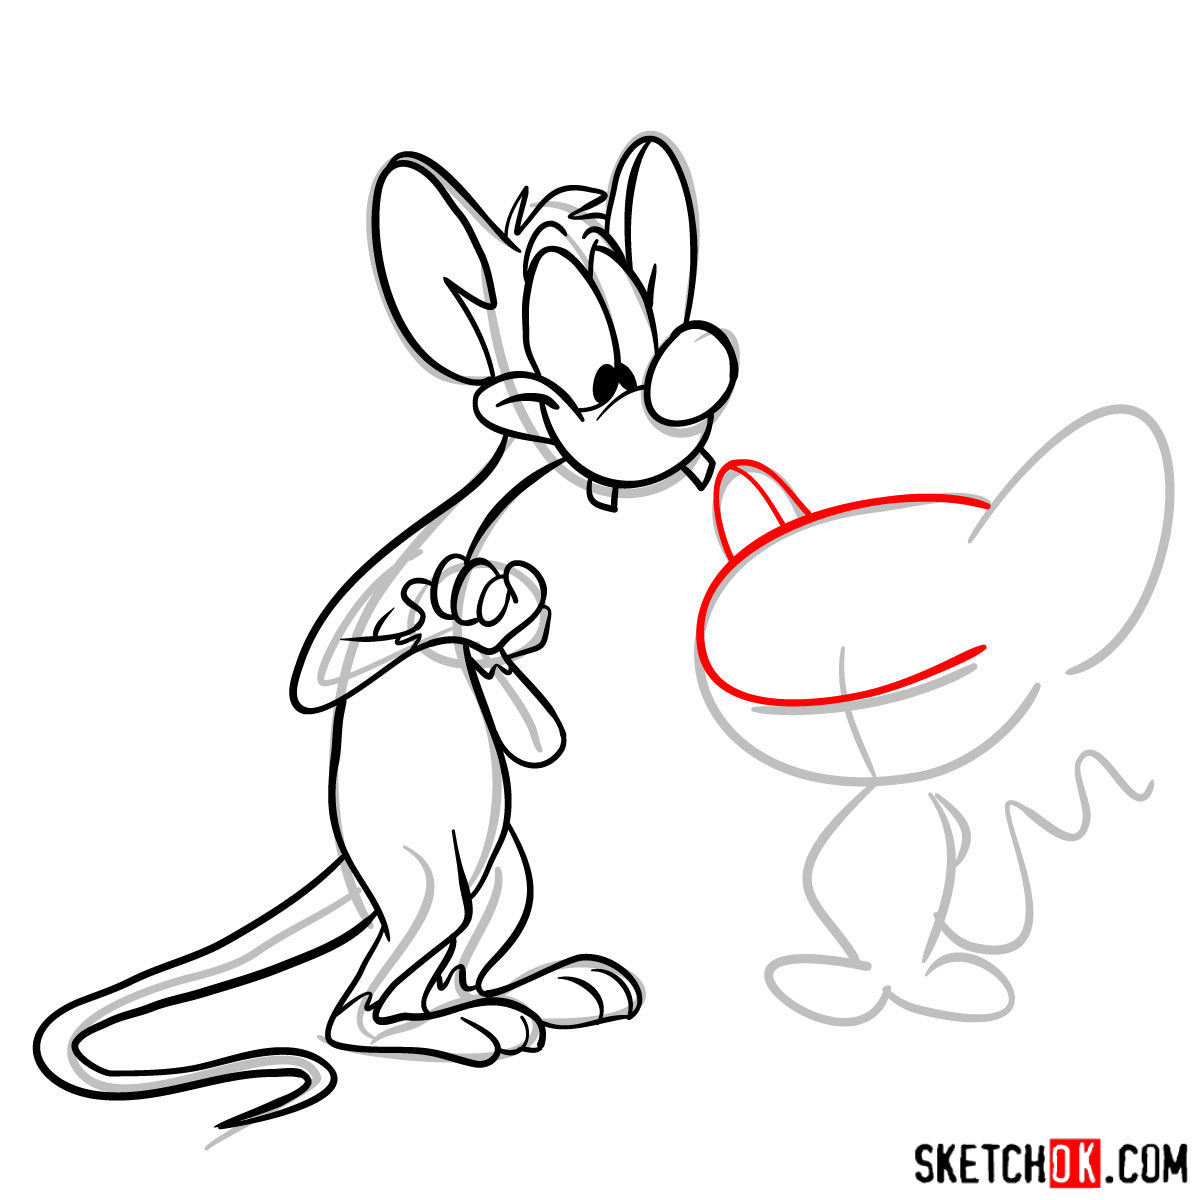 How to draw Pinky and the Brain together - SketchOk - step ...